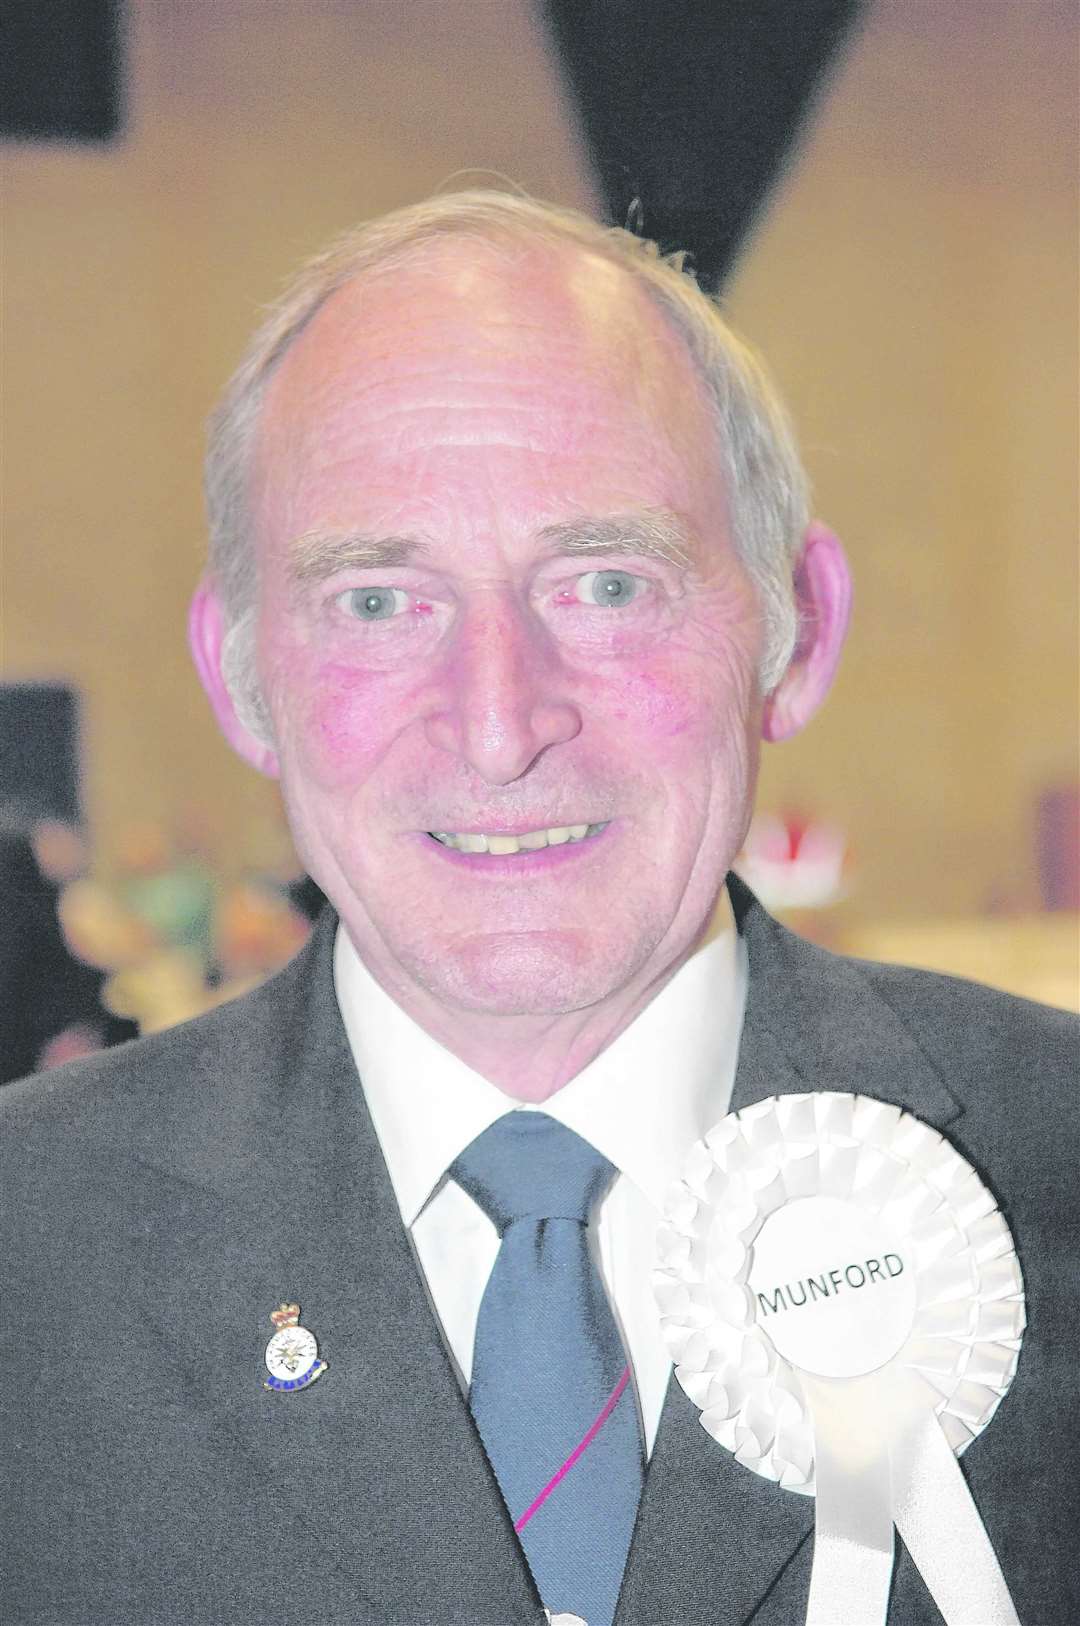 Steve Munford (cor) Independent for Boughton Monchelsea & Chart Sutton Ward. Picture by Martin Apps